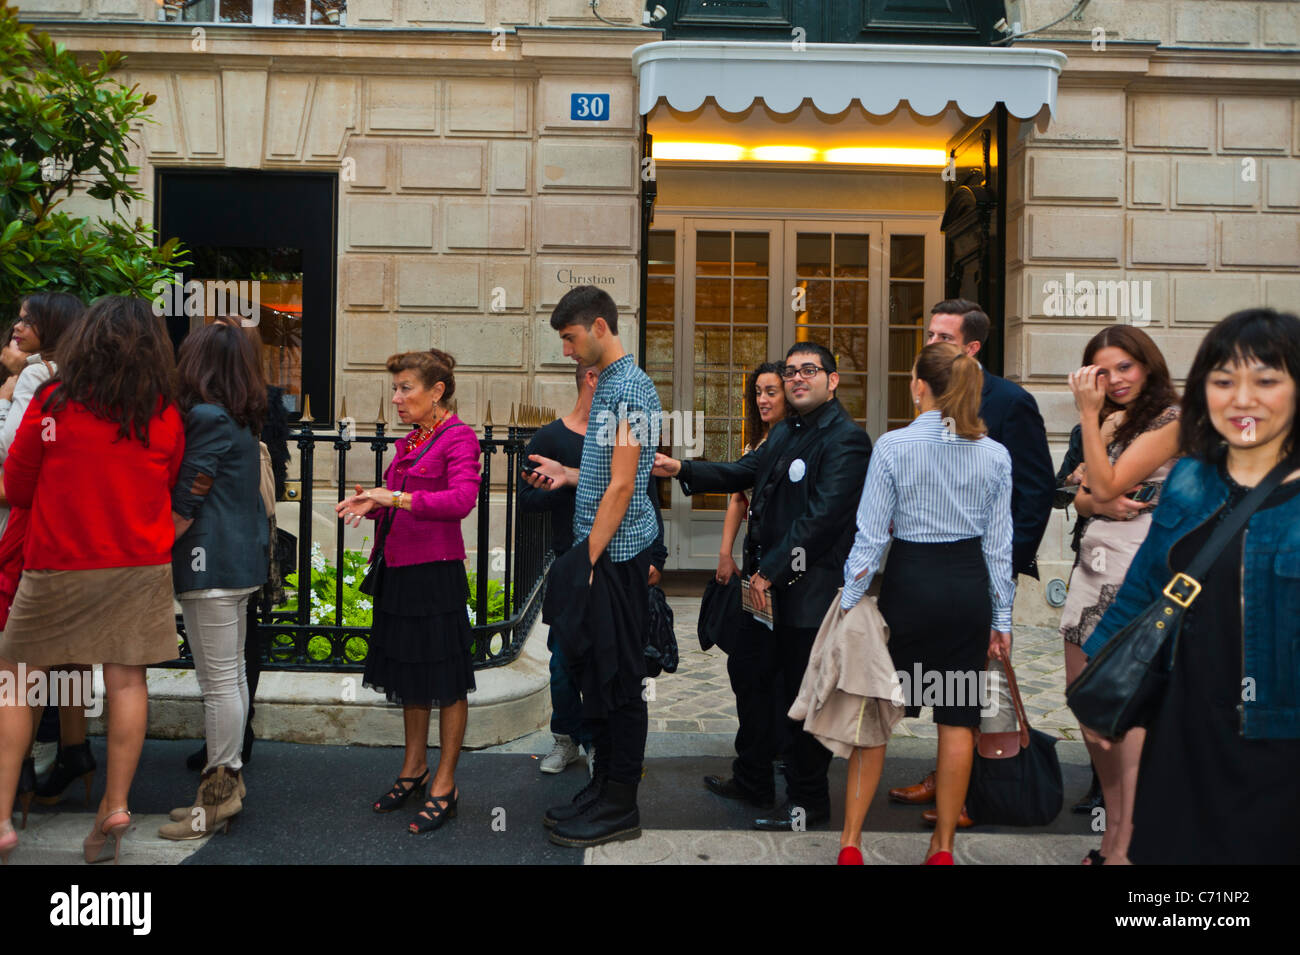 Paris, France, Crowd of French Teenagers Shopping, Queuing Outside Luxury Clothing Shops, at Fashion Ni-ght Event, '30 Avenue Montaigne' Christian Dior, France men and women clothing store Stock Photo